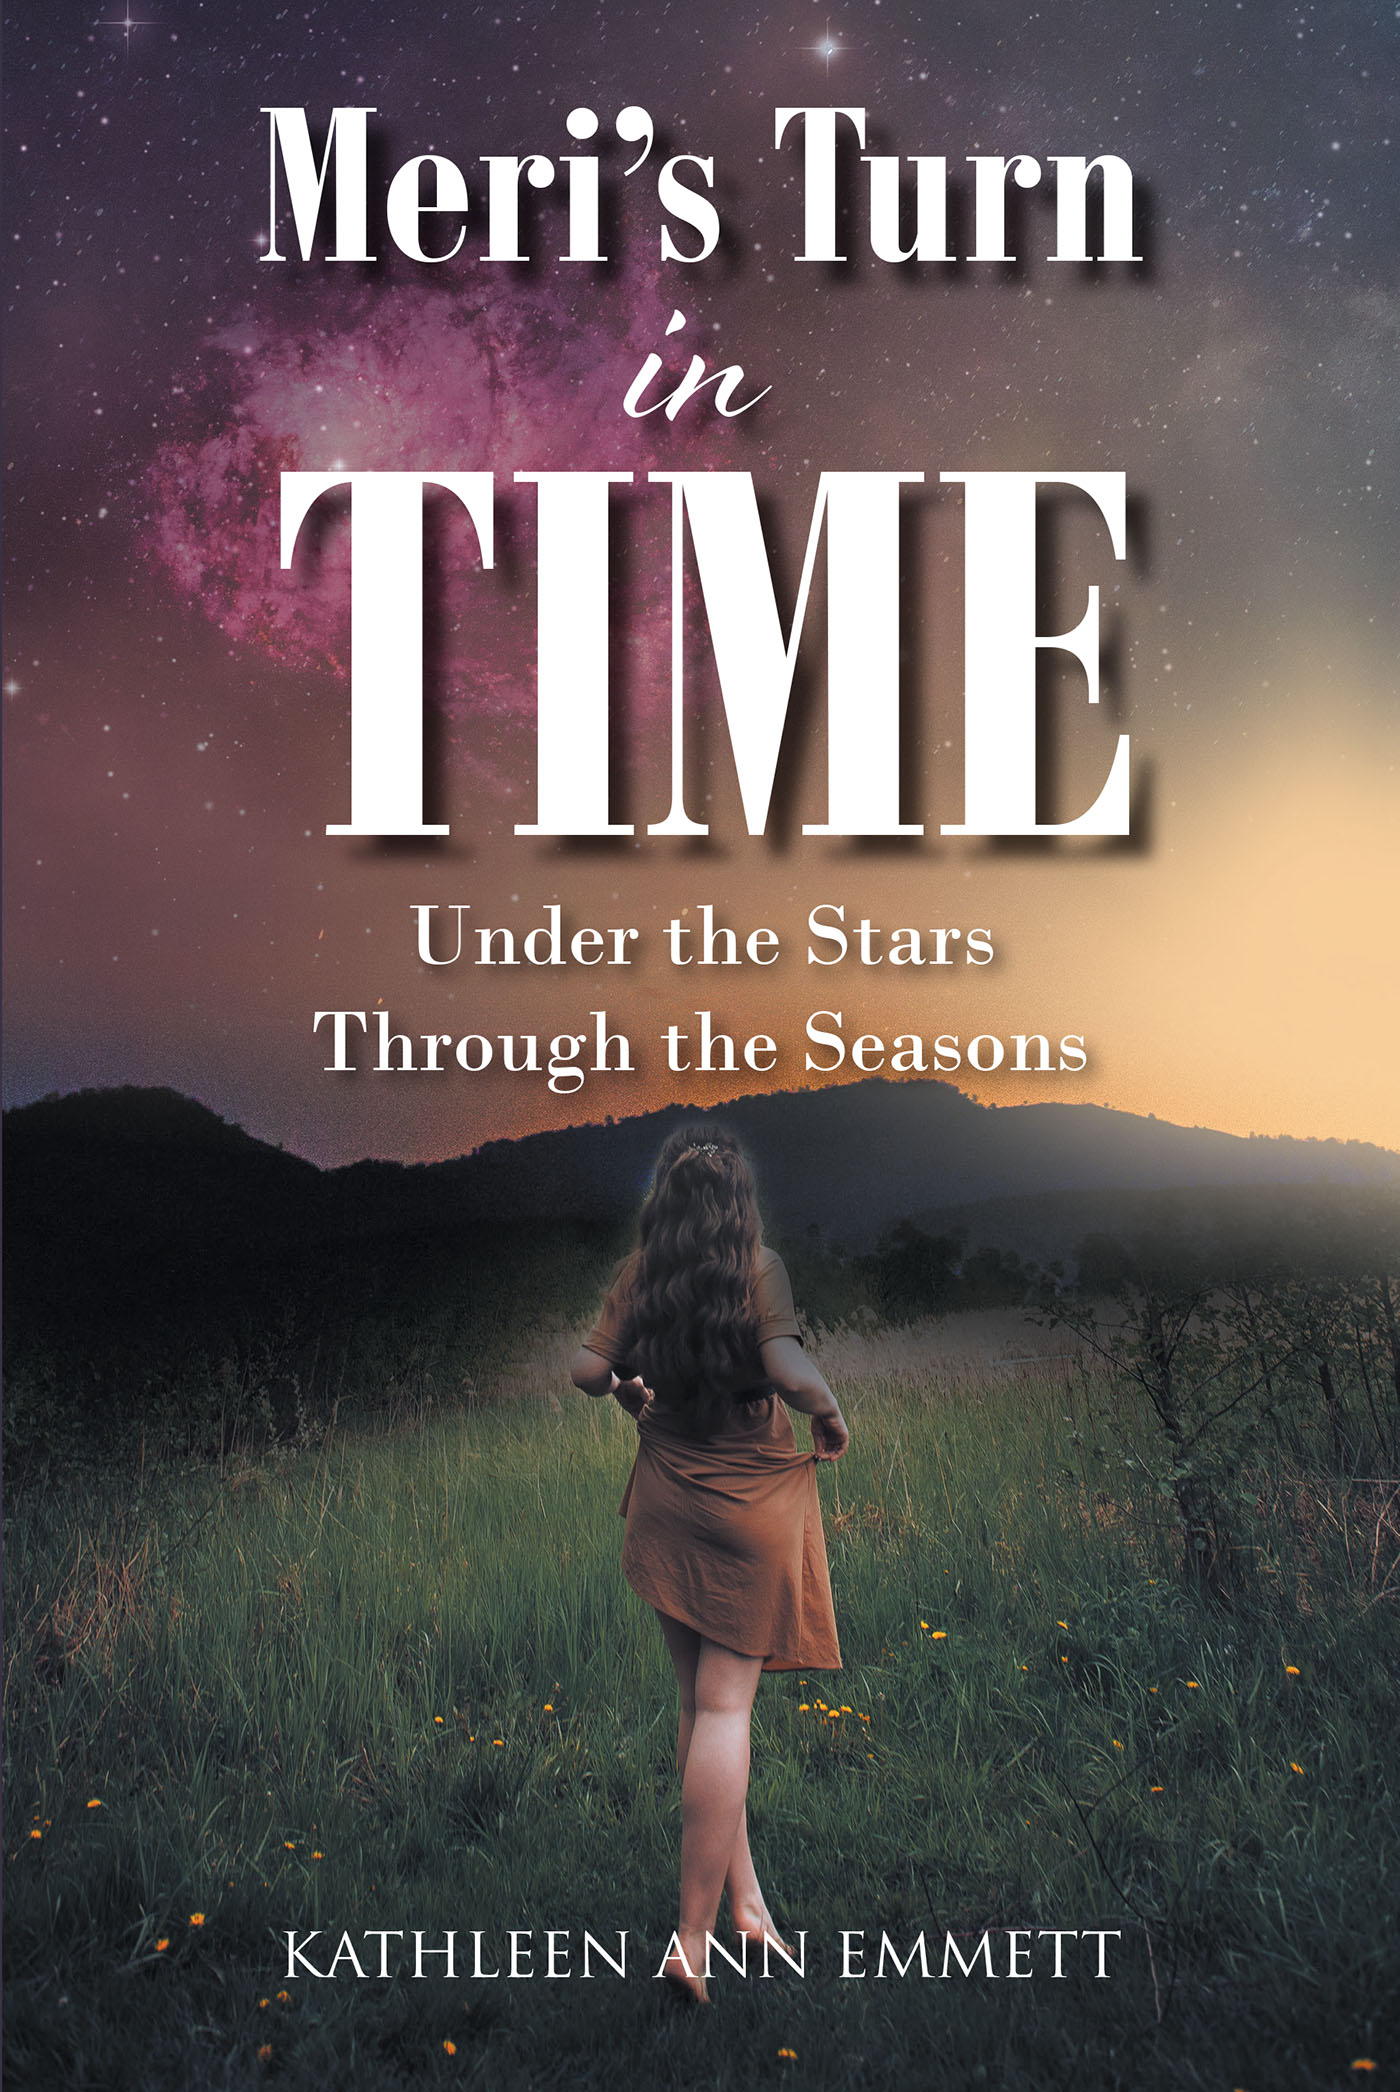 Kathleen Ann Emmett’s Newly Released "Meri’s Turn in Time: Under the Stars Through the Seasons" is an Engaging Tale of Discovery and Wonder